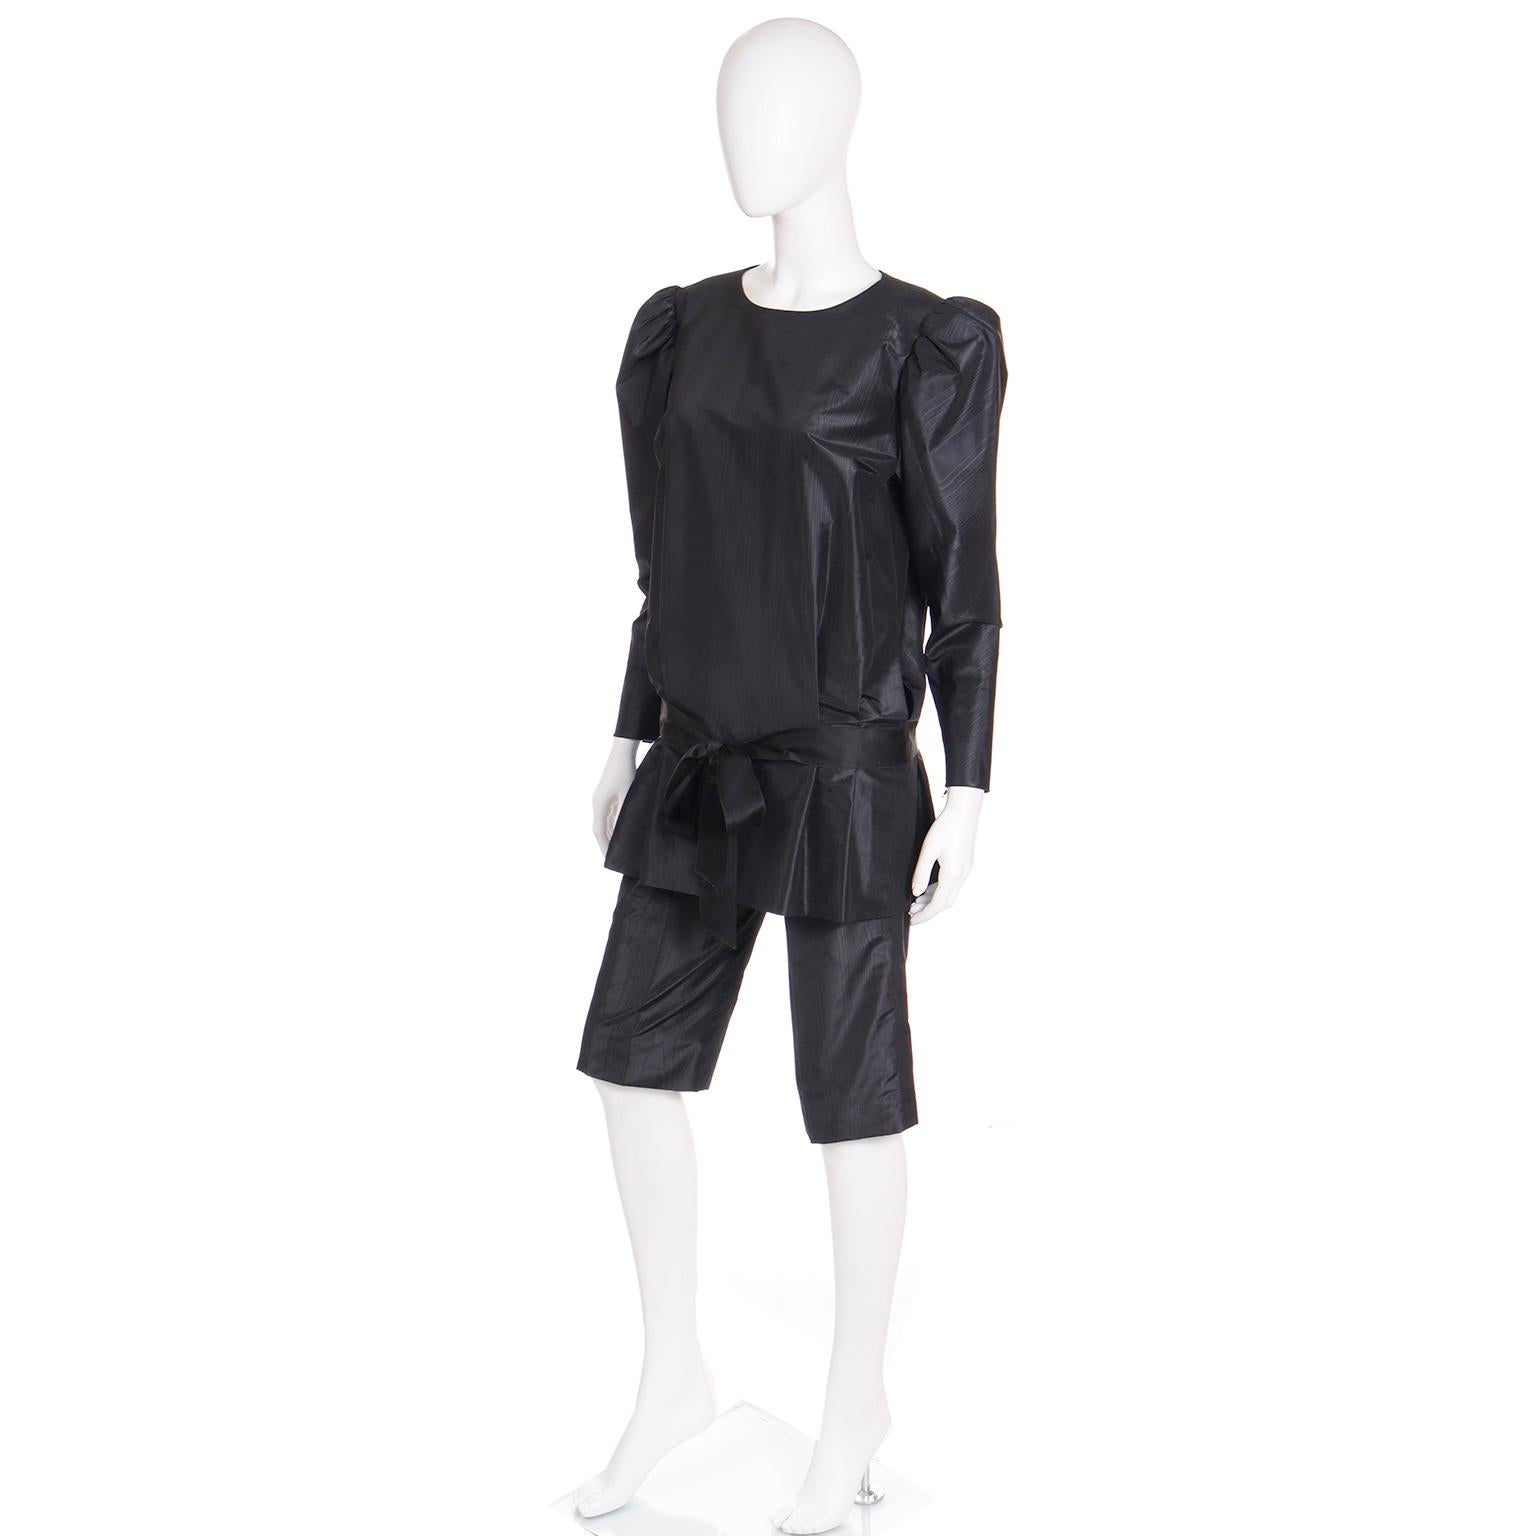 Givenchy Haute Couture Vintage 1980s Black Satin Shorts & Top Outfit 2